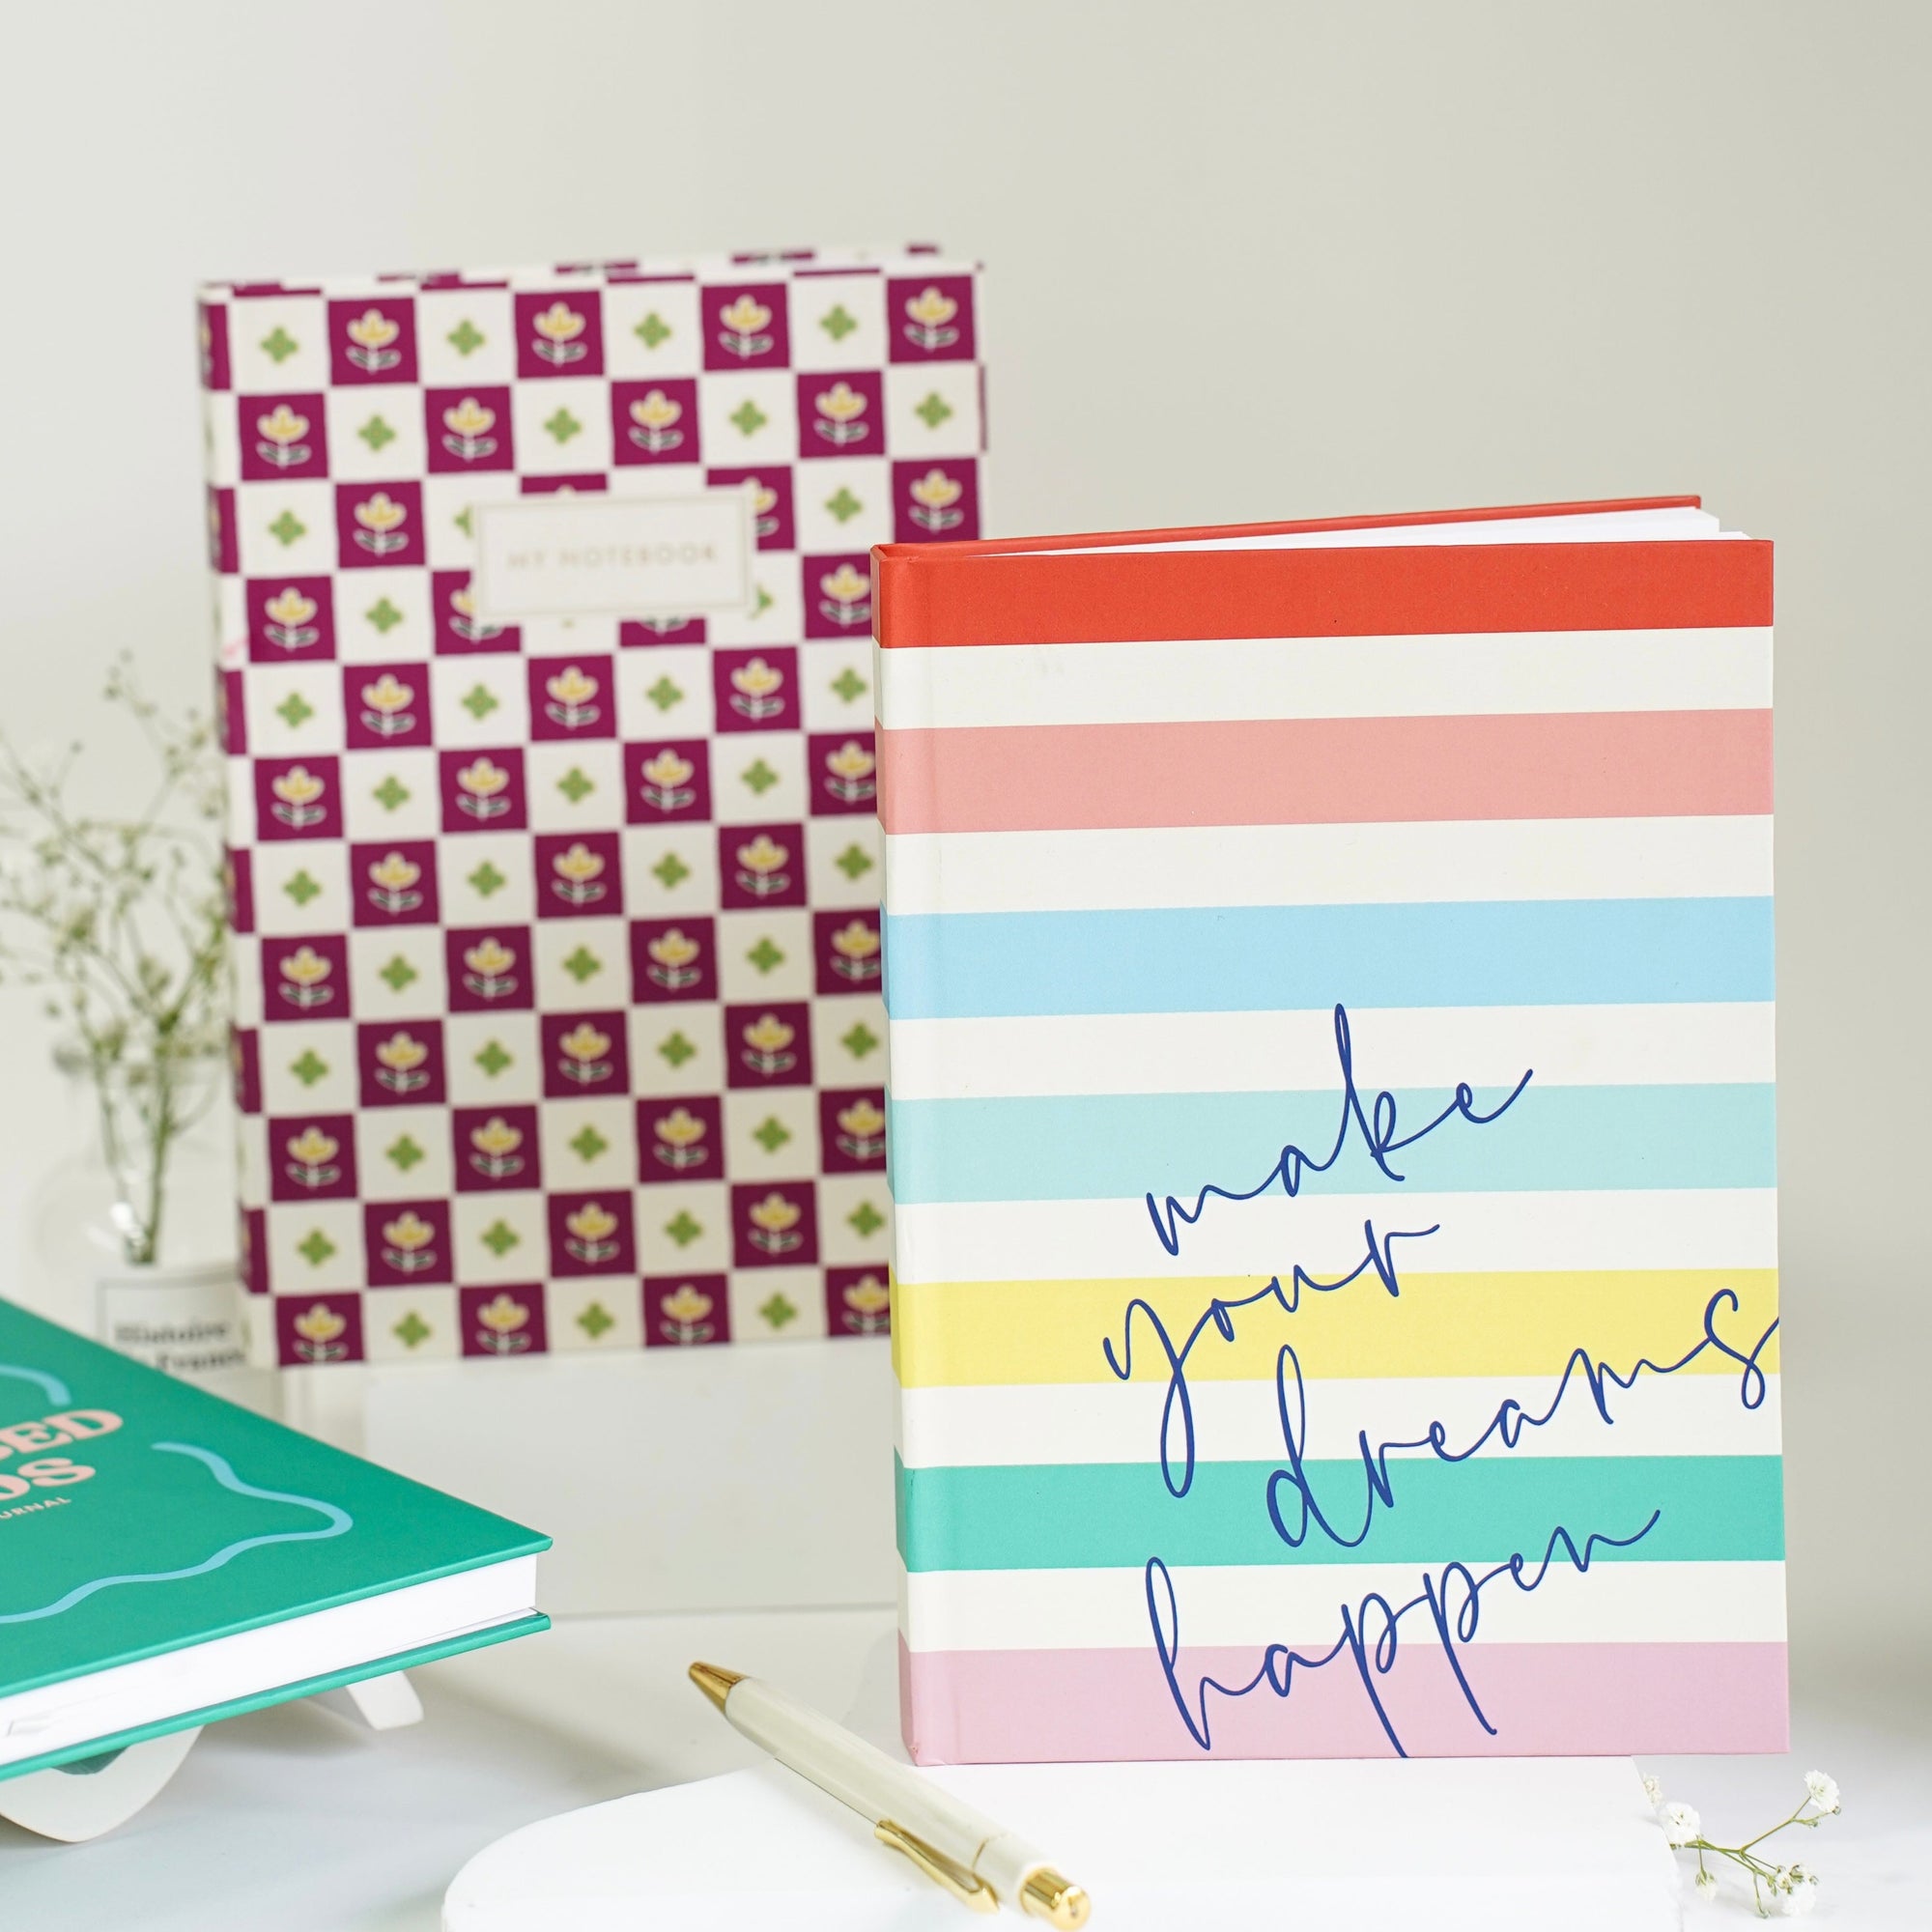 7mm A5 sized notebooks are available in ruled & dot grid which can be personalized.